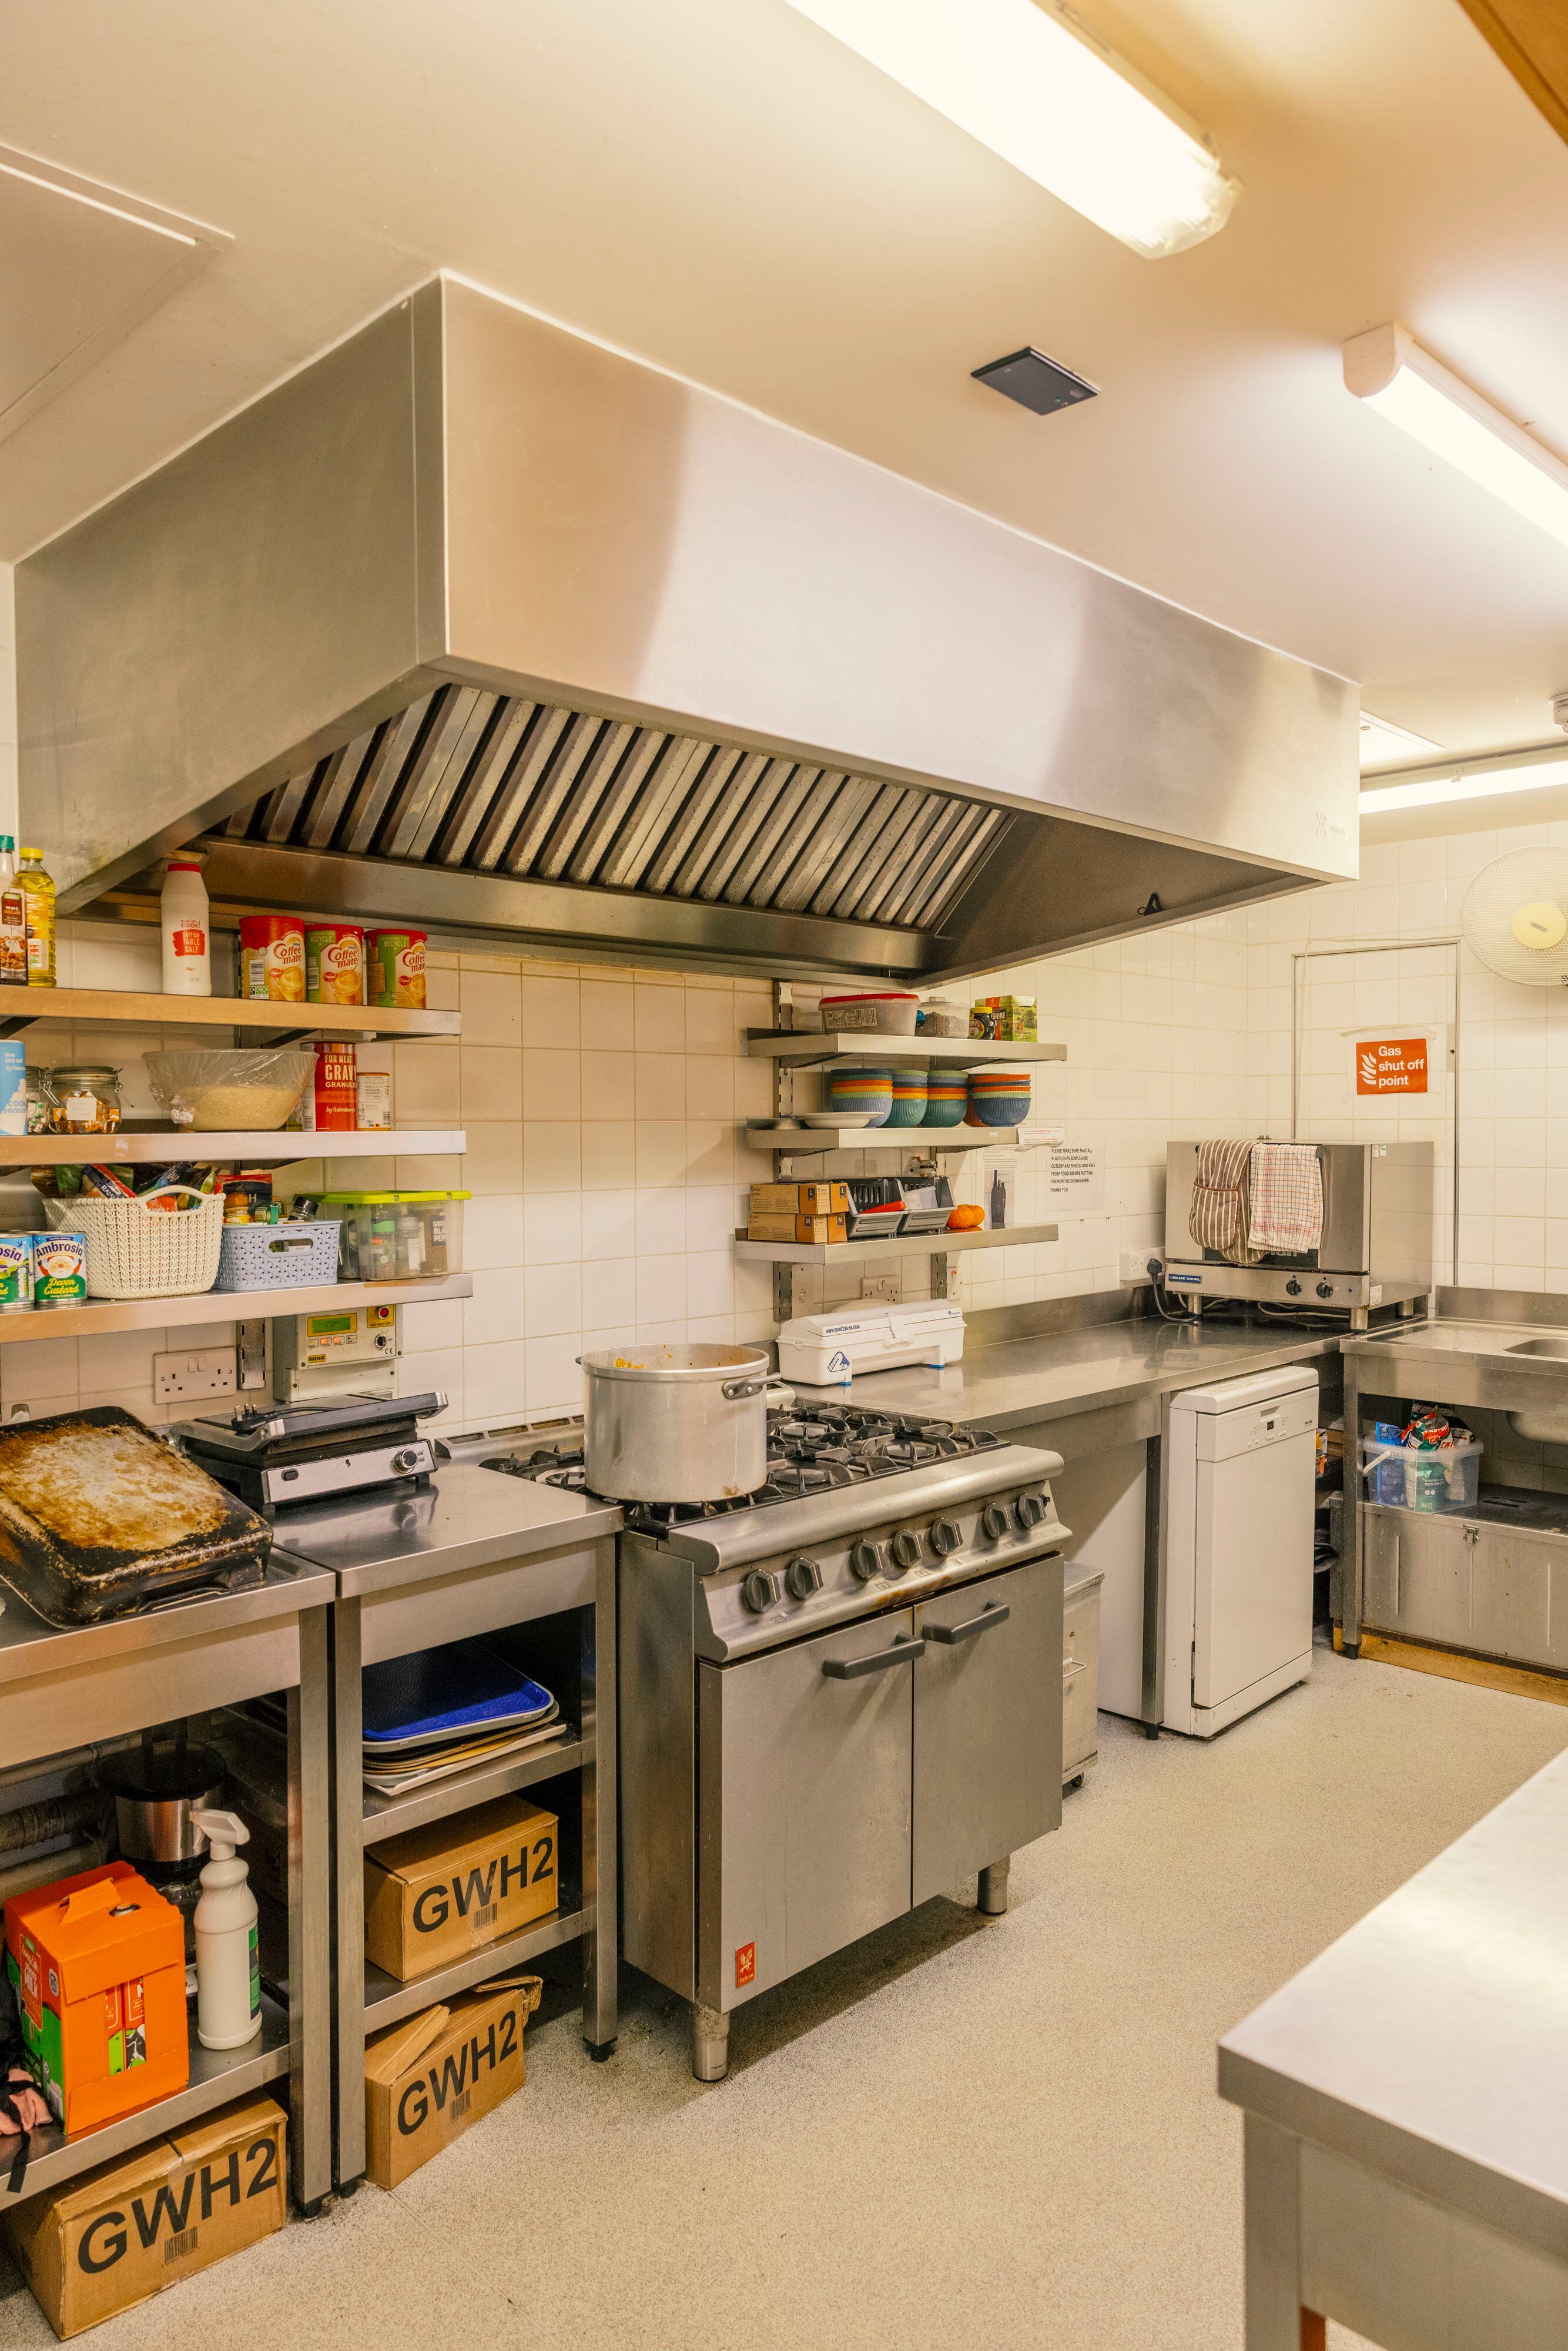 Jimmy’s 451 has a commercial kitchen and caters to people with particularly complex needs.